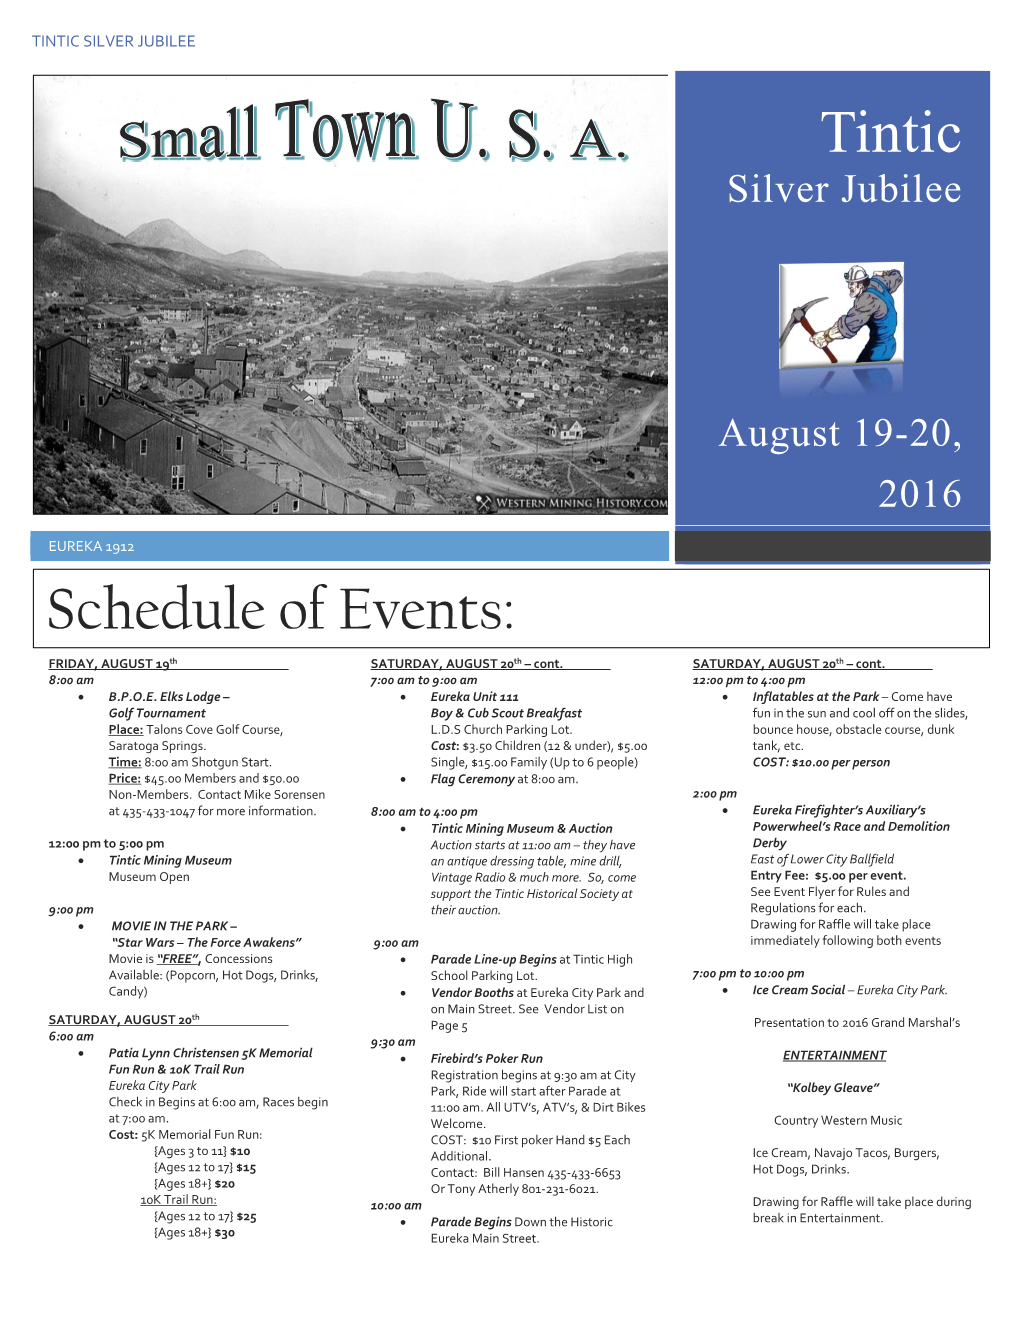 Tintic Schedule of Events